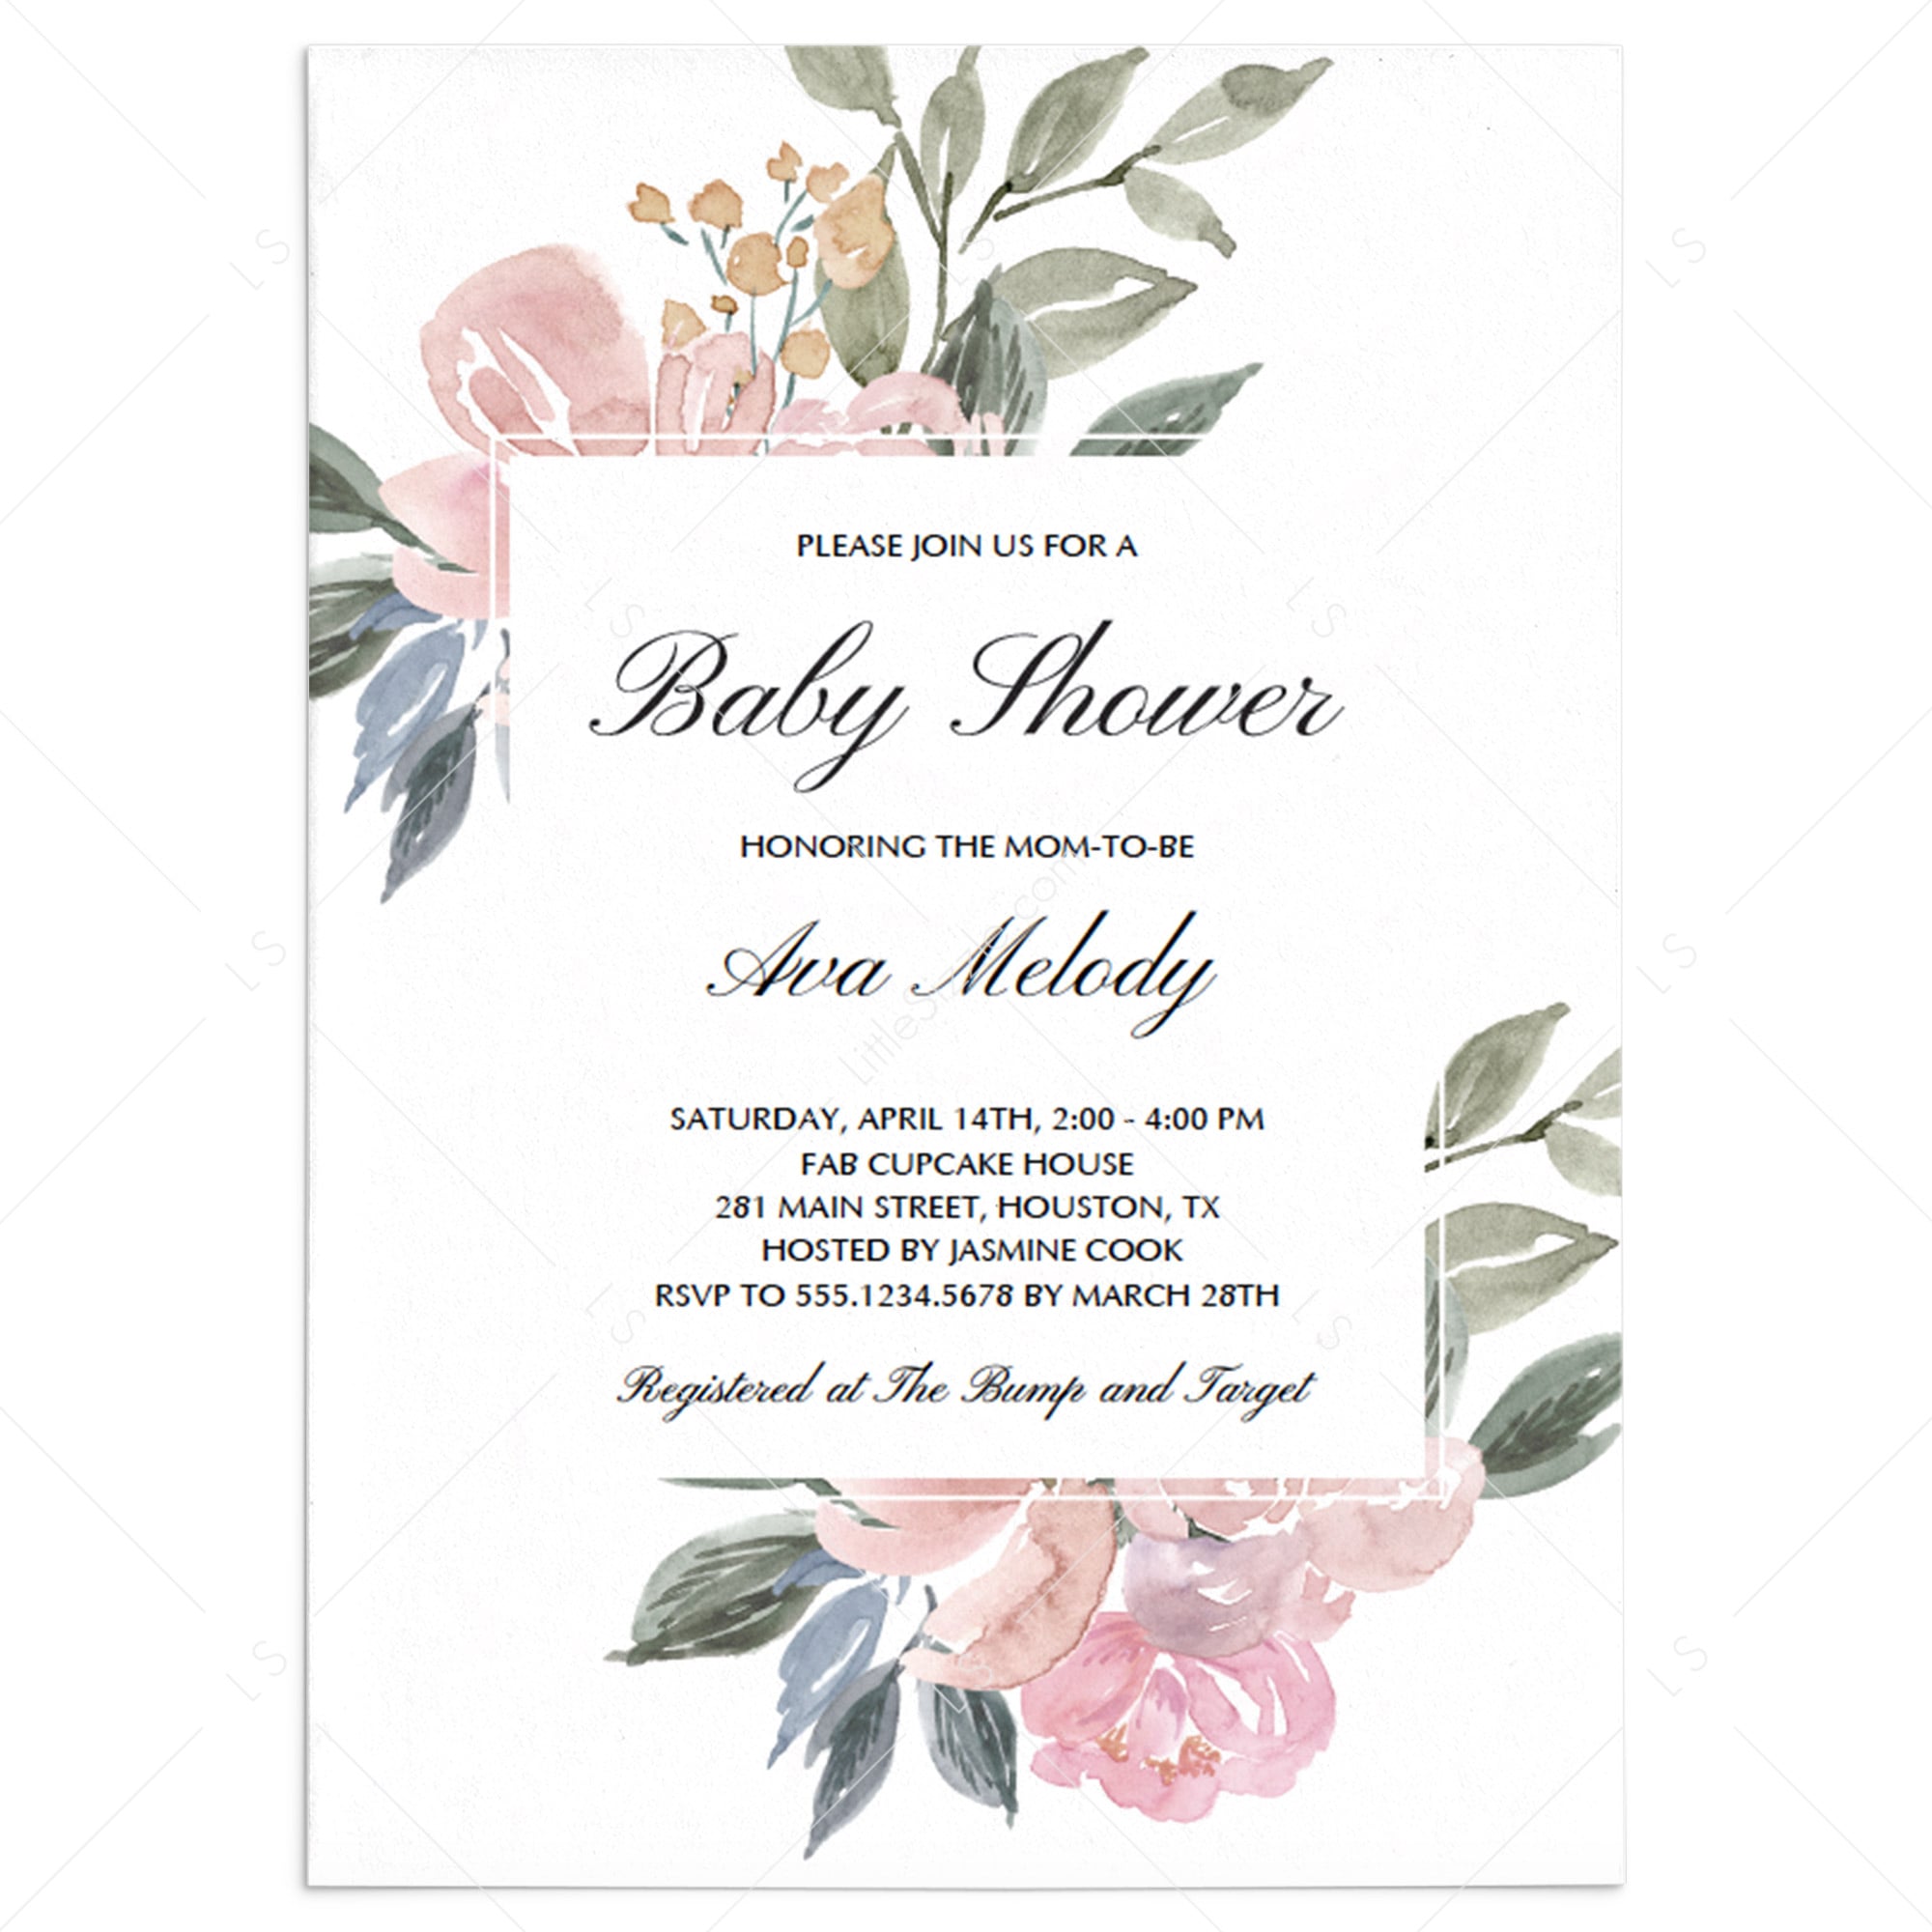 Whimsical Baby Shower Invitation Template by LittleSizzle